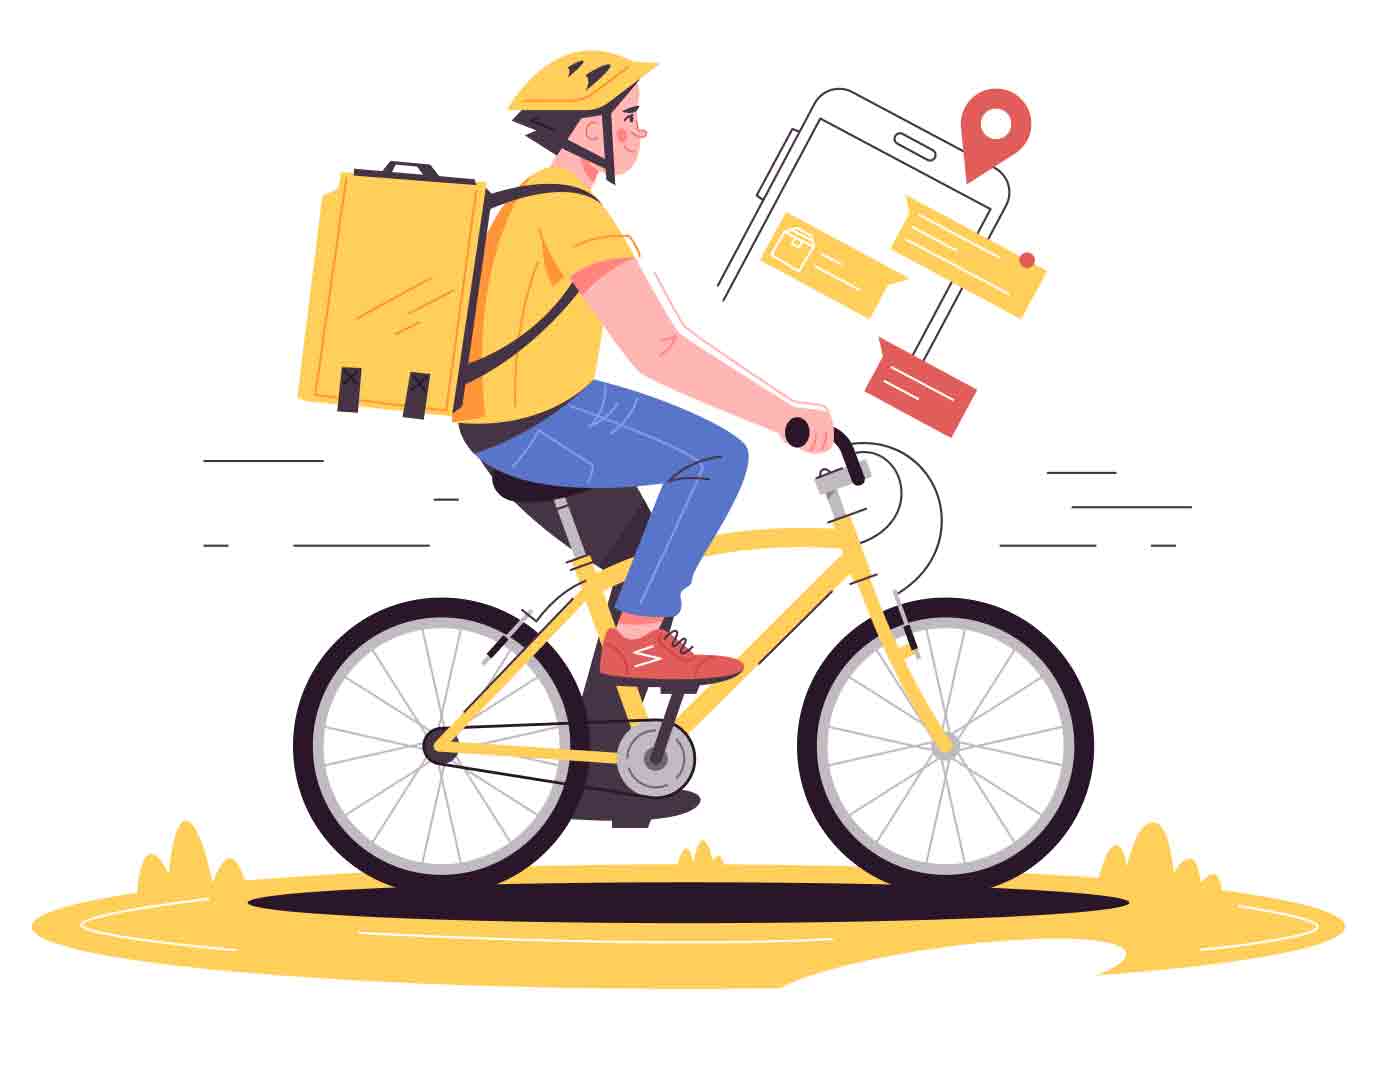 Illustrations are all about delivery related services. Fast and safe delivery of any kind of physical products right on time. Vector illustrations.